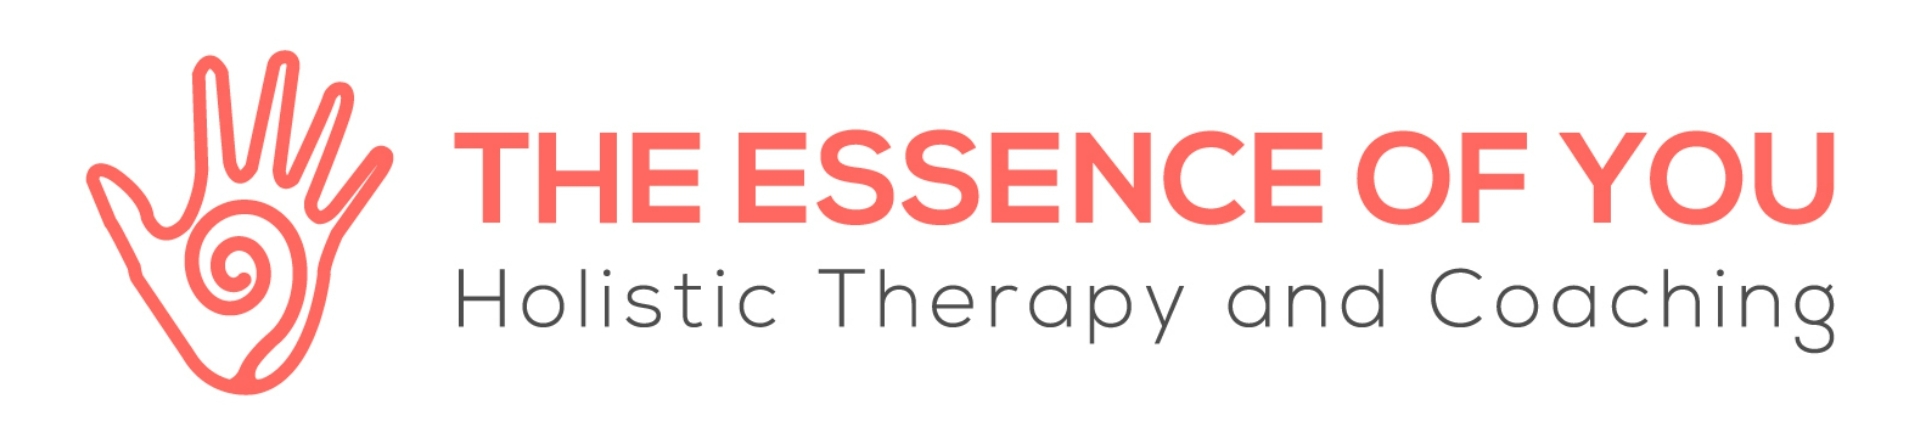 The Essence of You - Holistic Therapy and Coaching